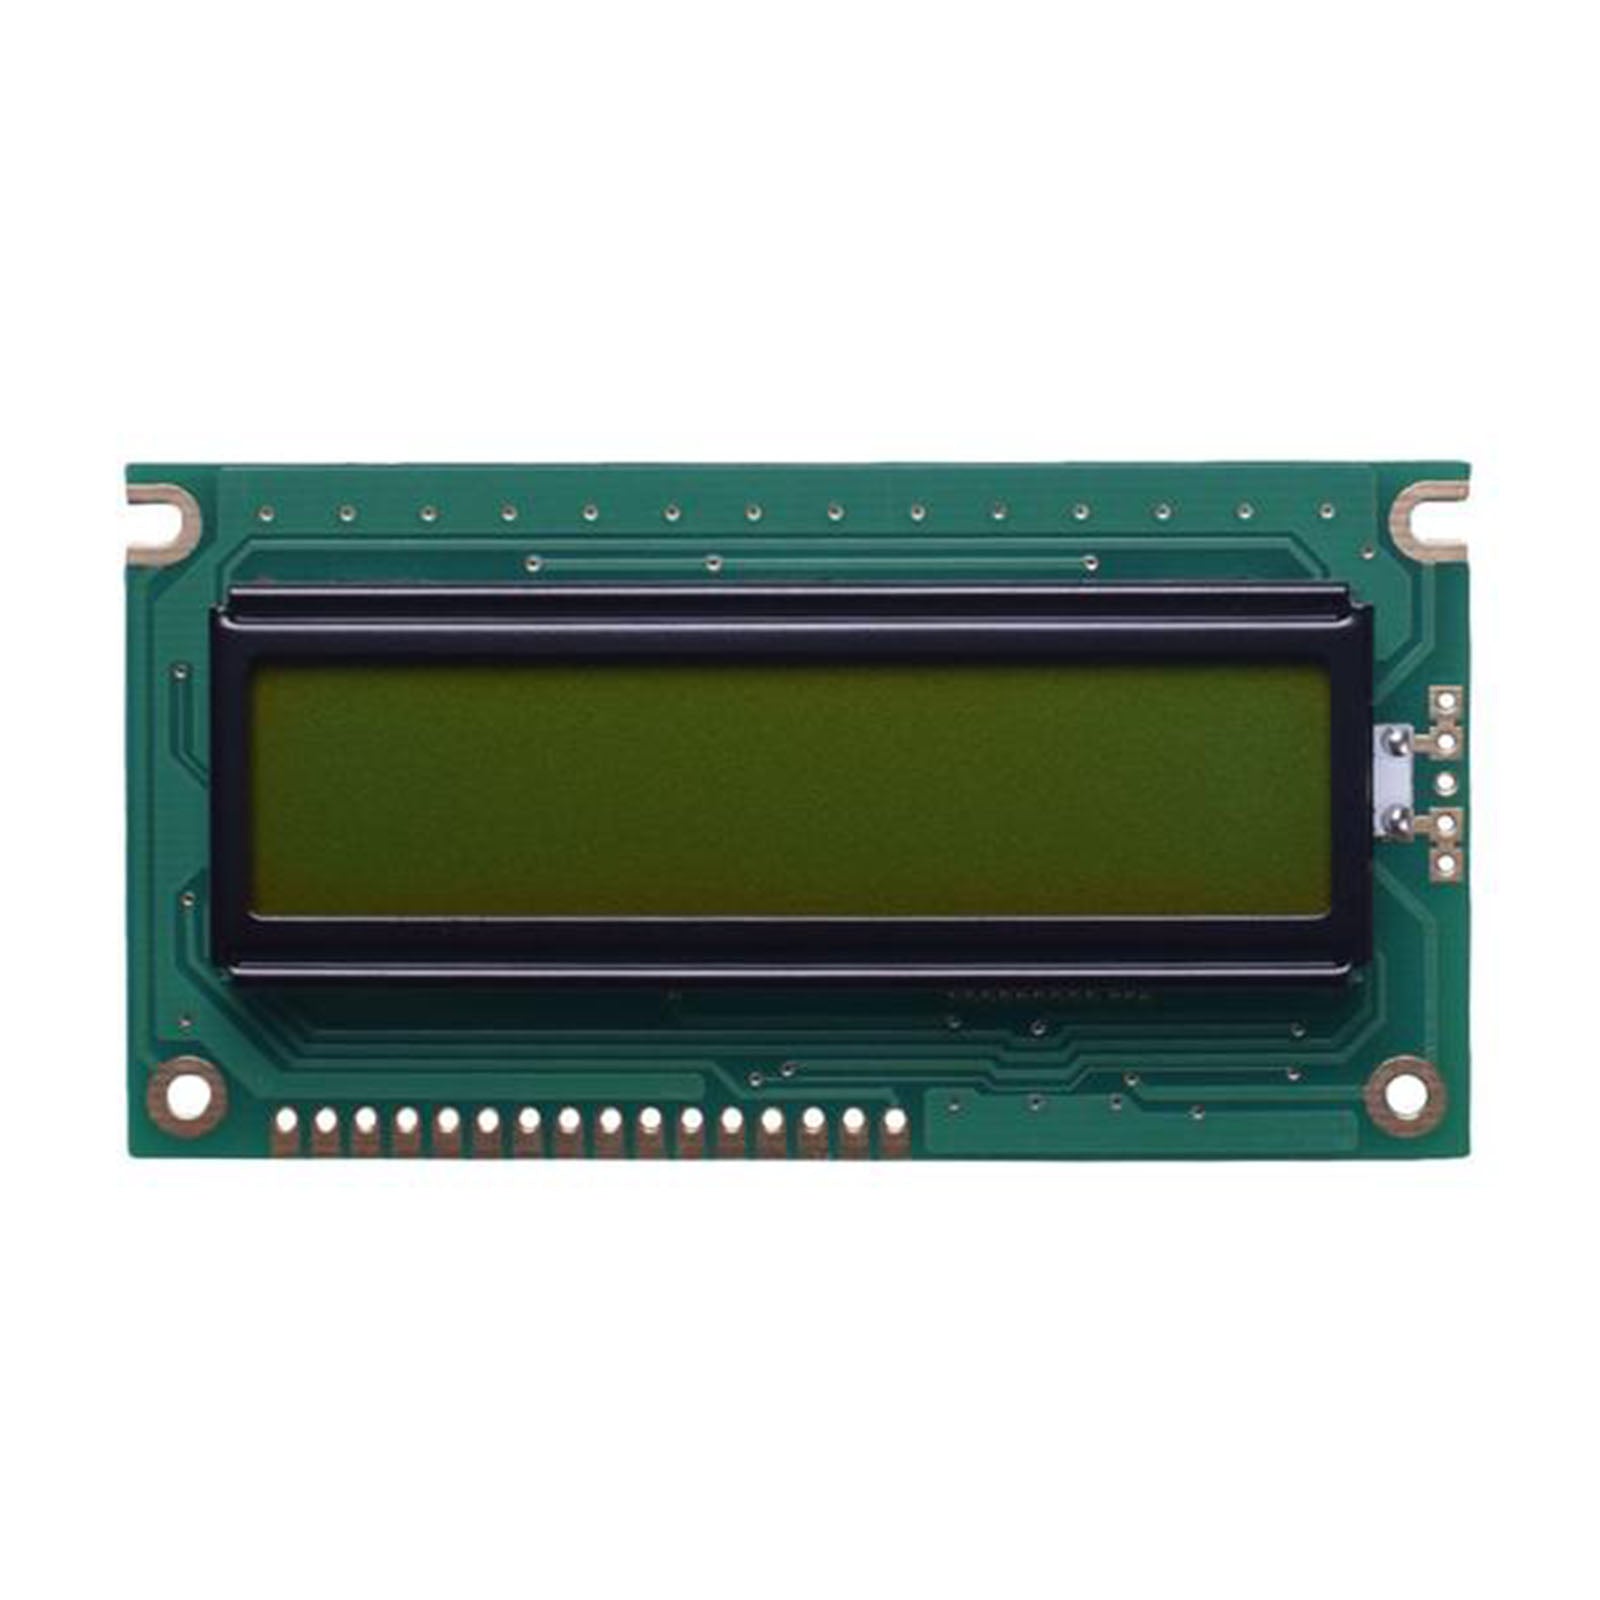 front of 16x2 character LCD module